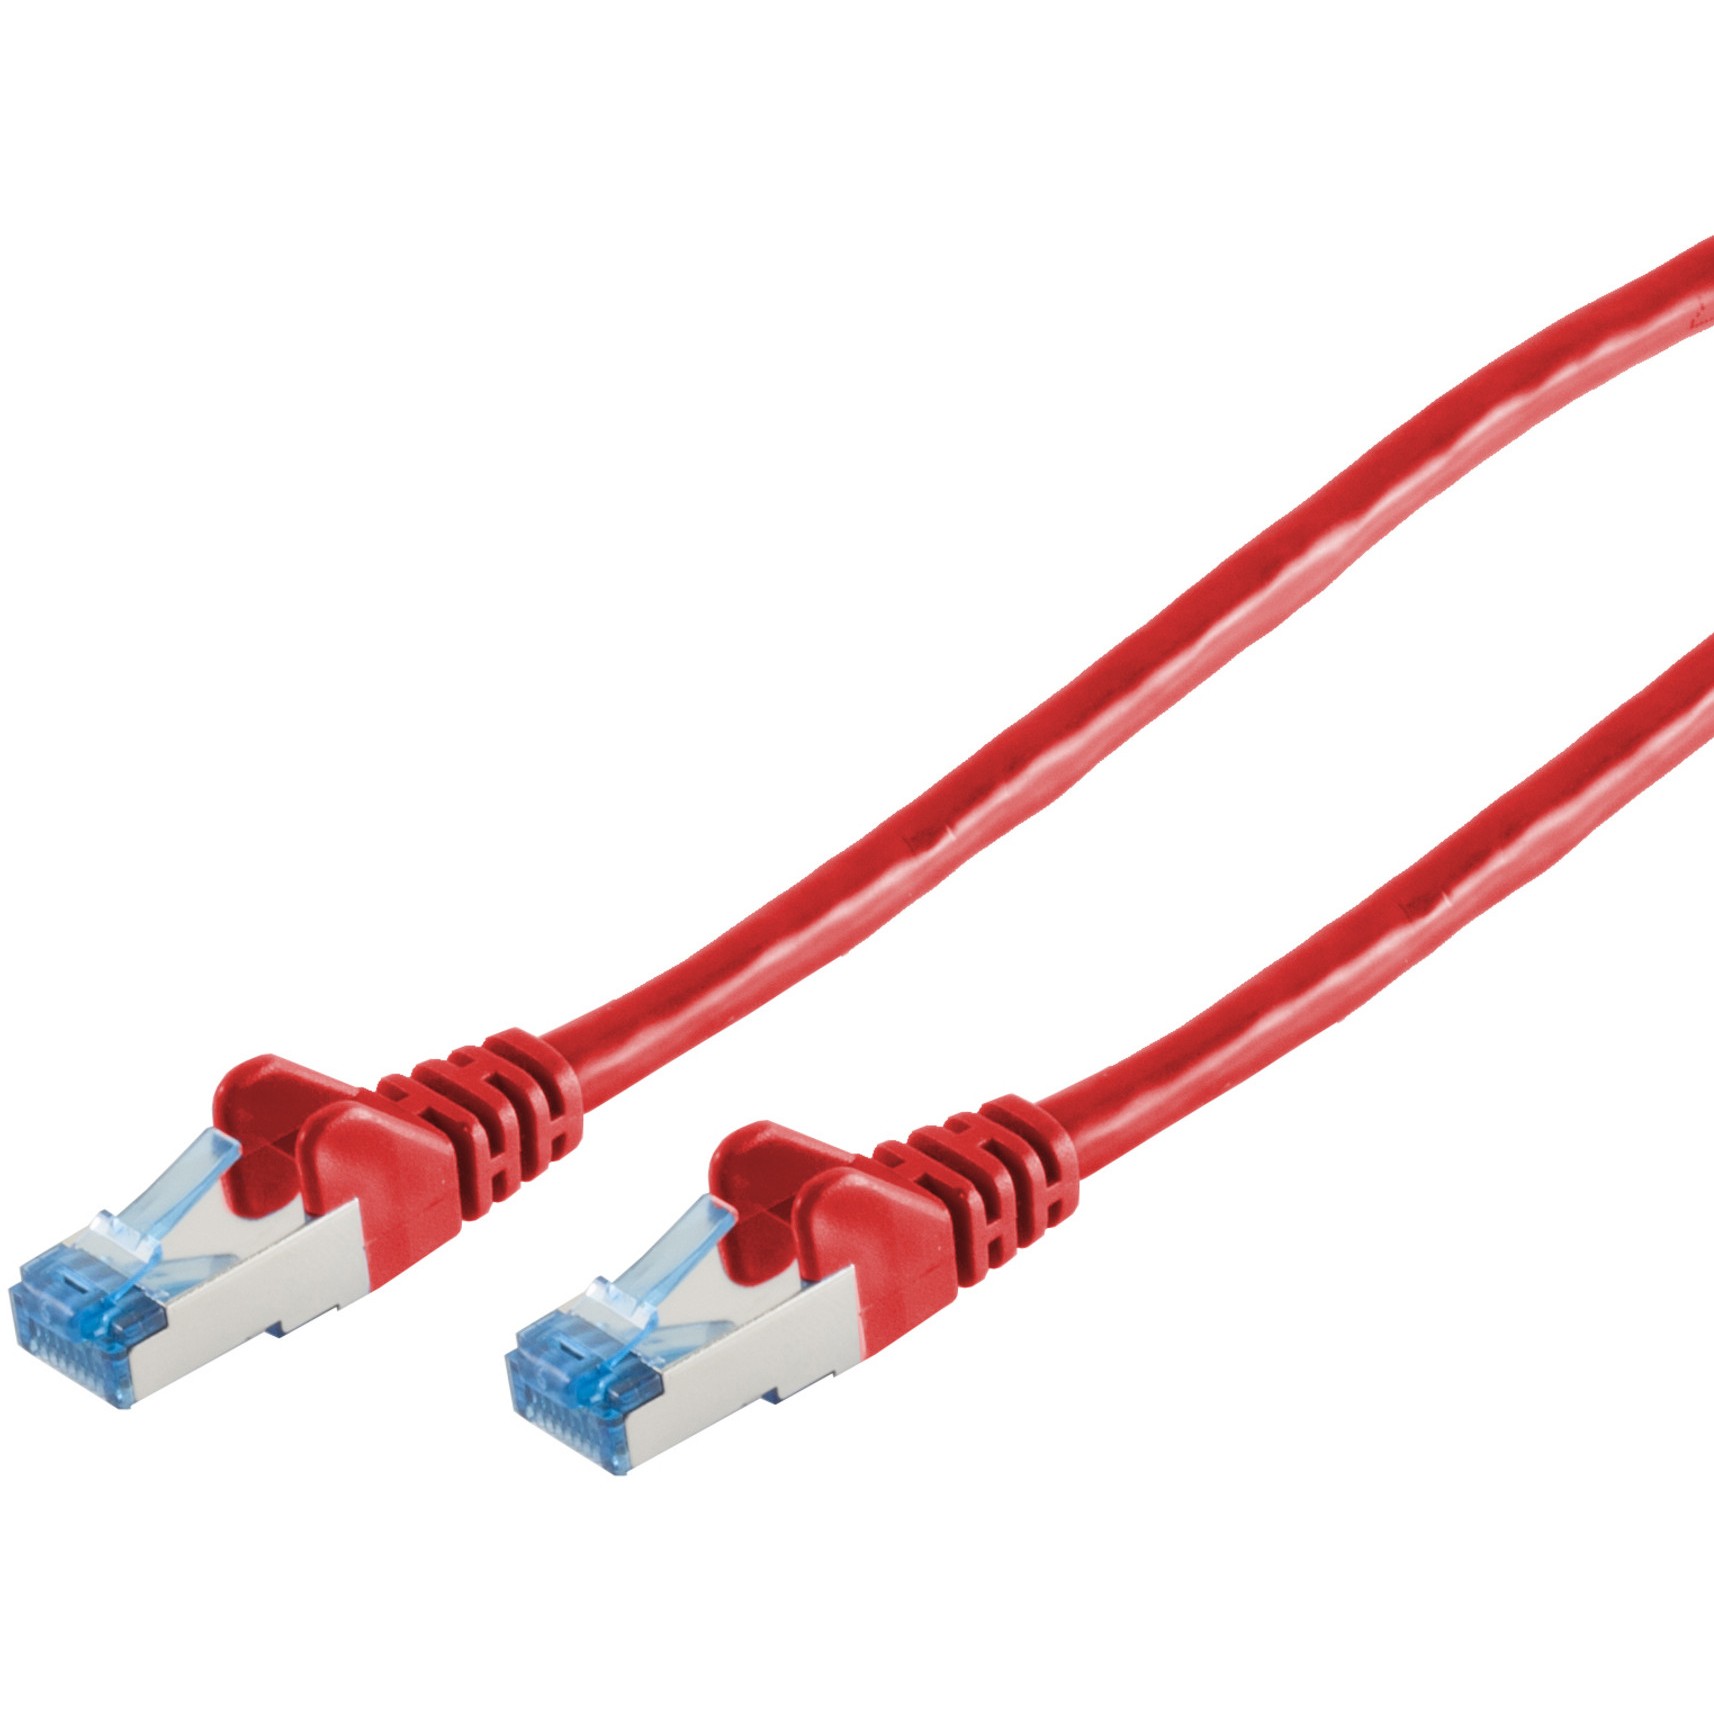 S-Conn 75711-R networking cable